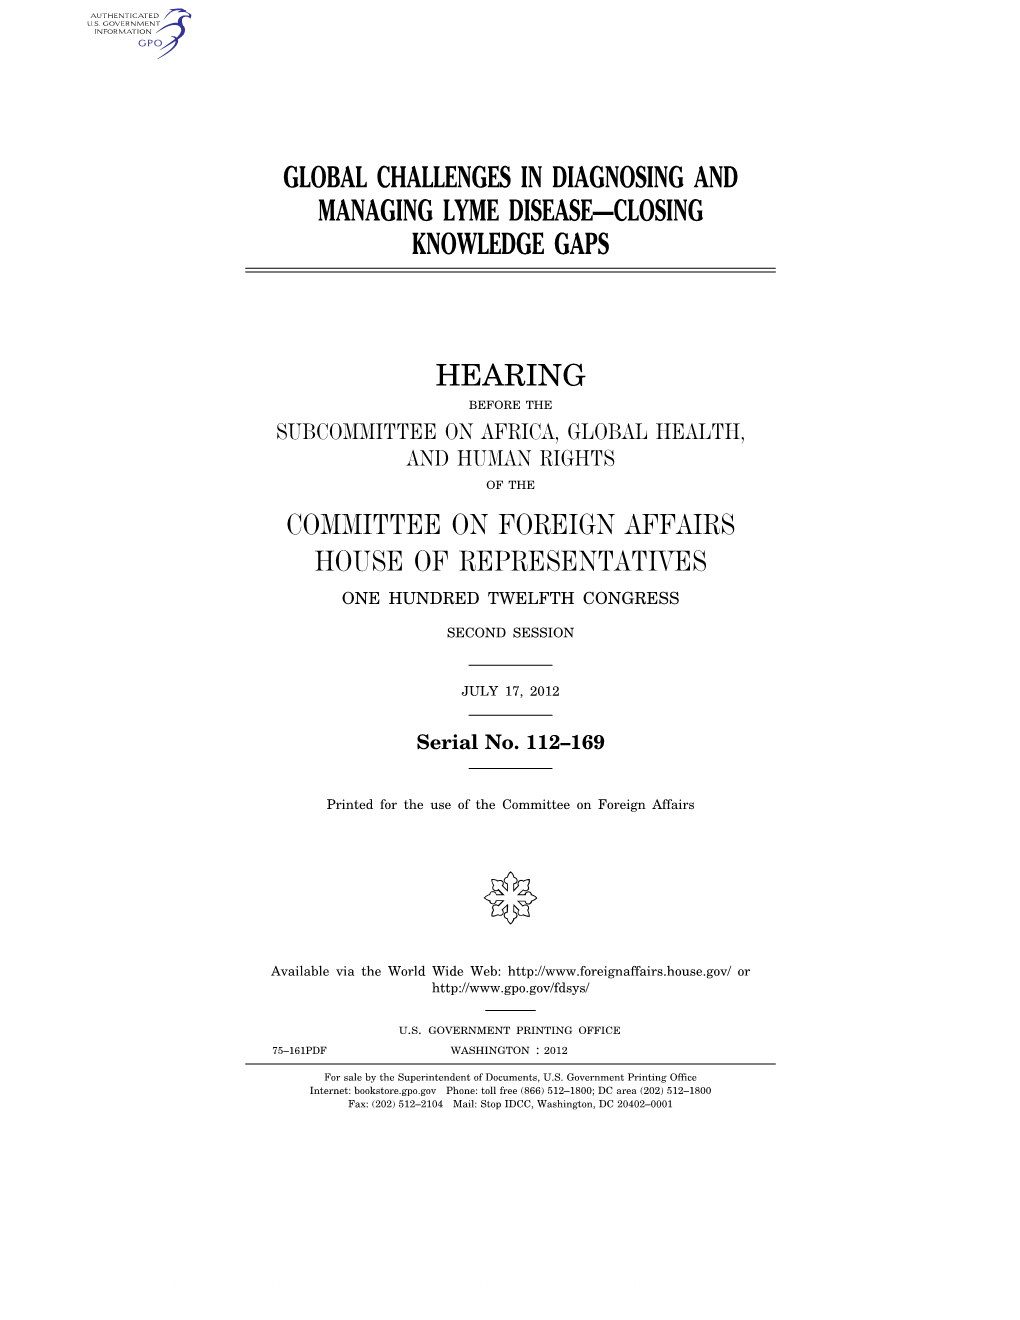 Global Challenges in Diagnosing and Managing Lyme Disease—Closing Knowledge Gaps Hearing Committee on Foreign Affairs House Of